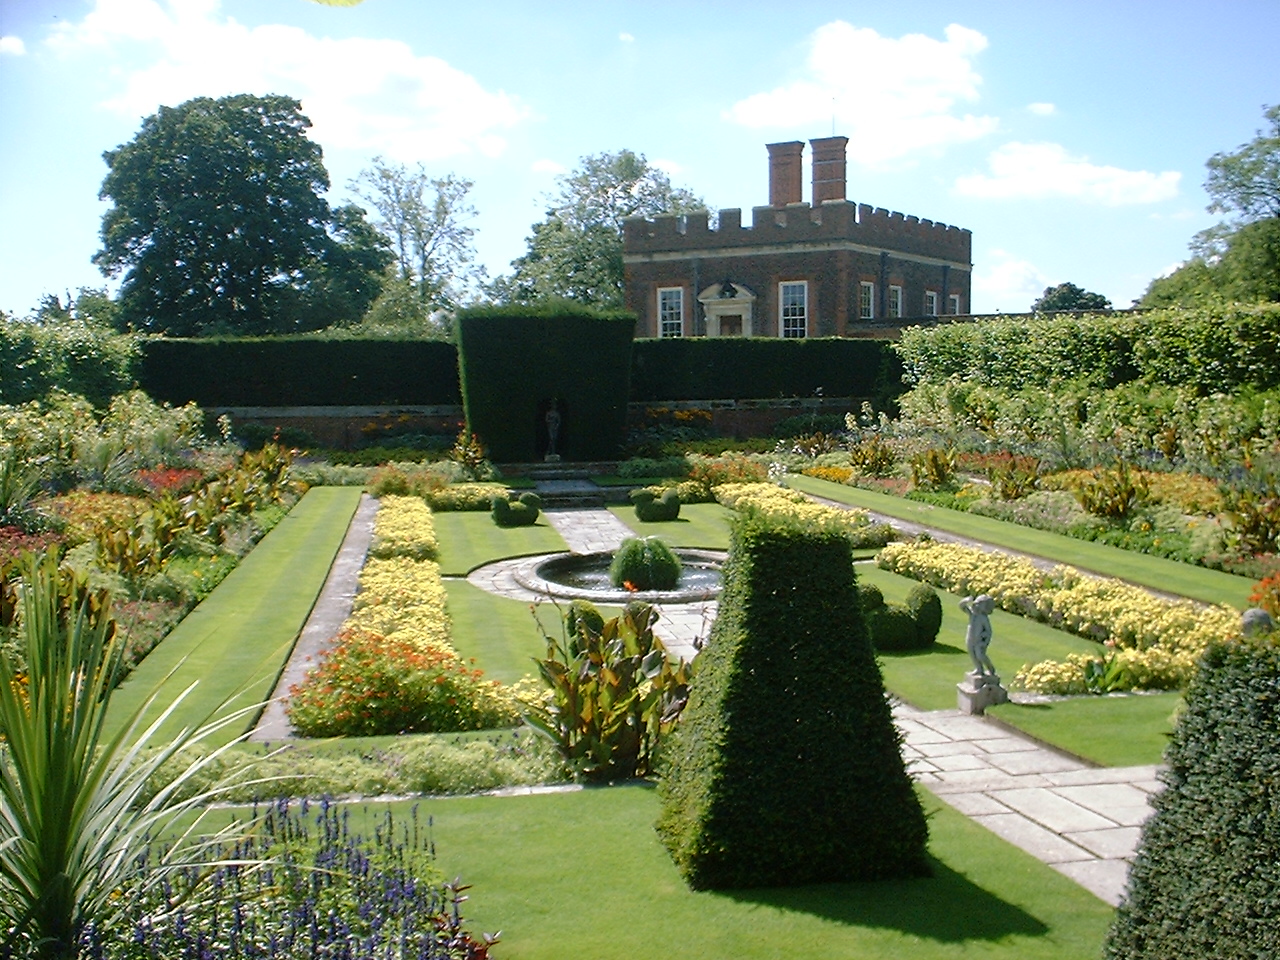 there is a large garden with a lot of plants and hedges